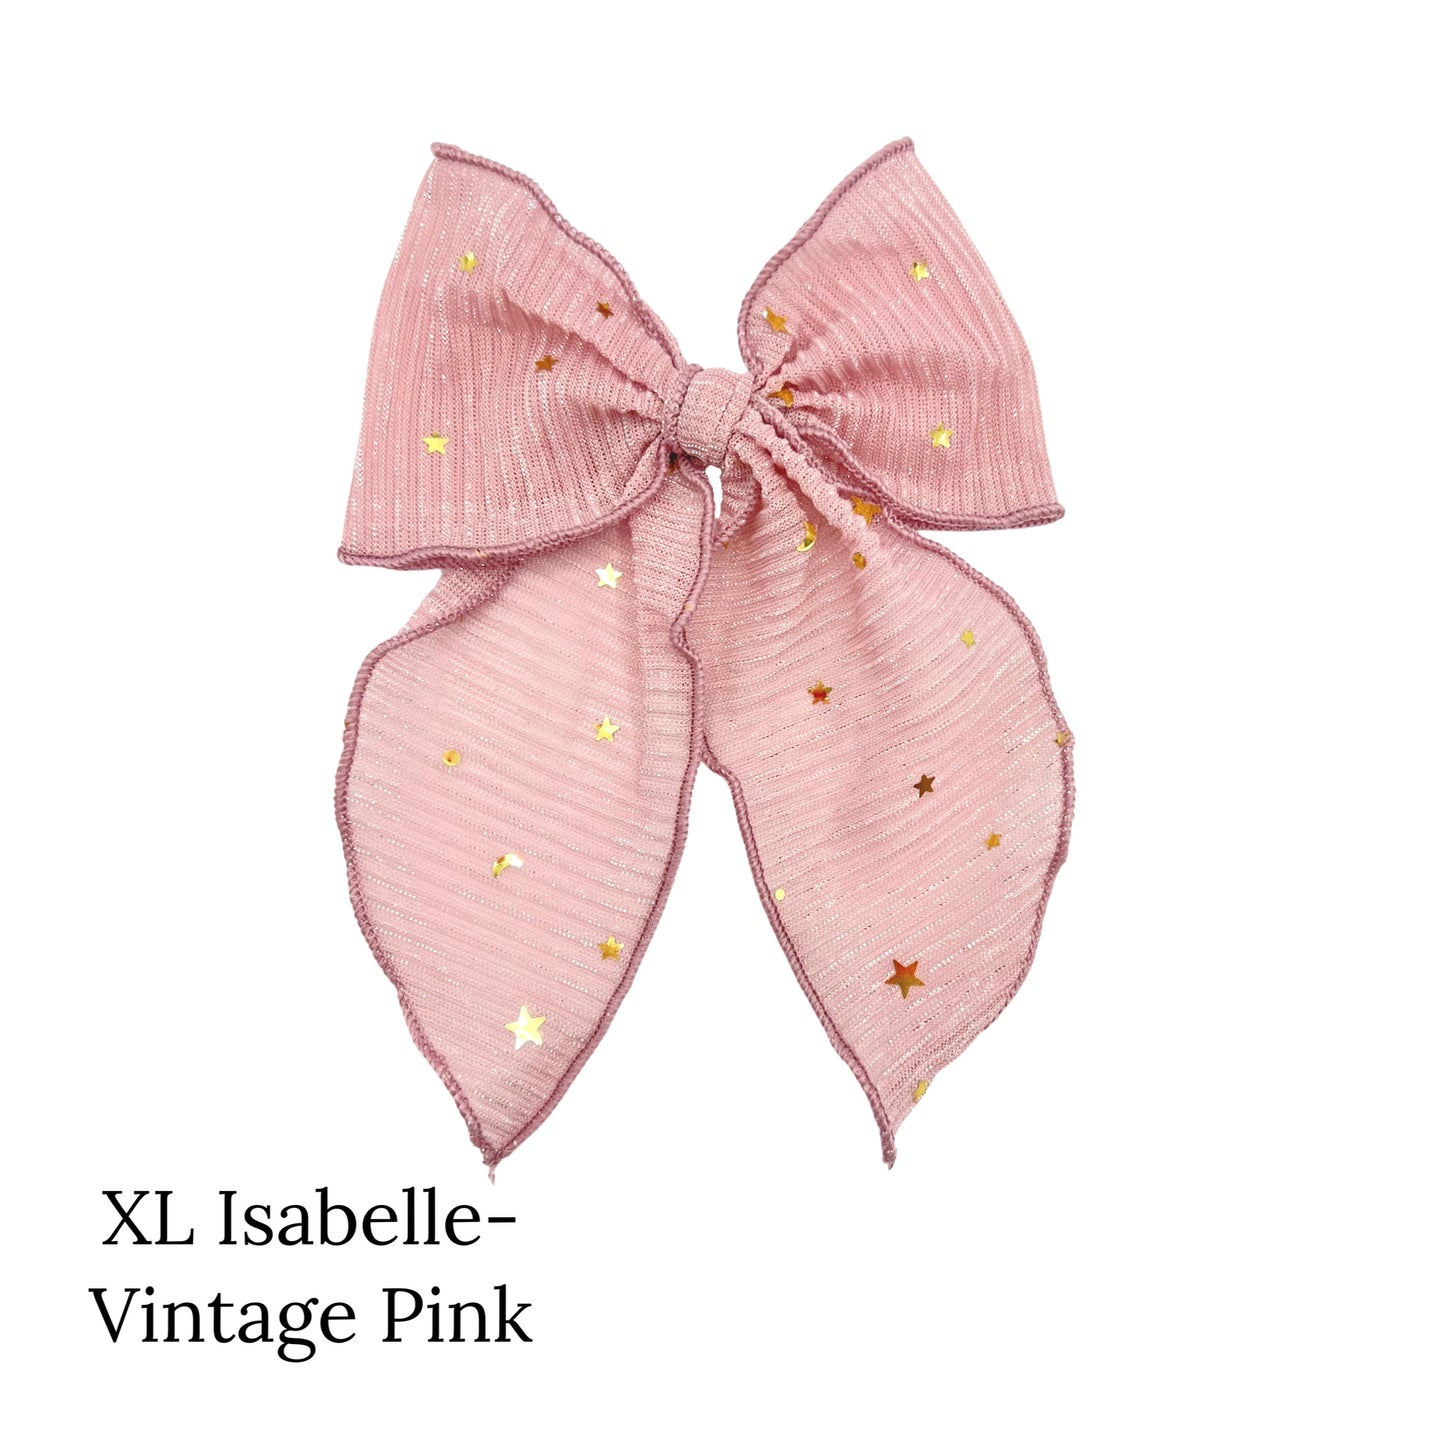 Large pink bow with gold stars on a white background